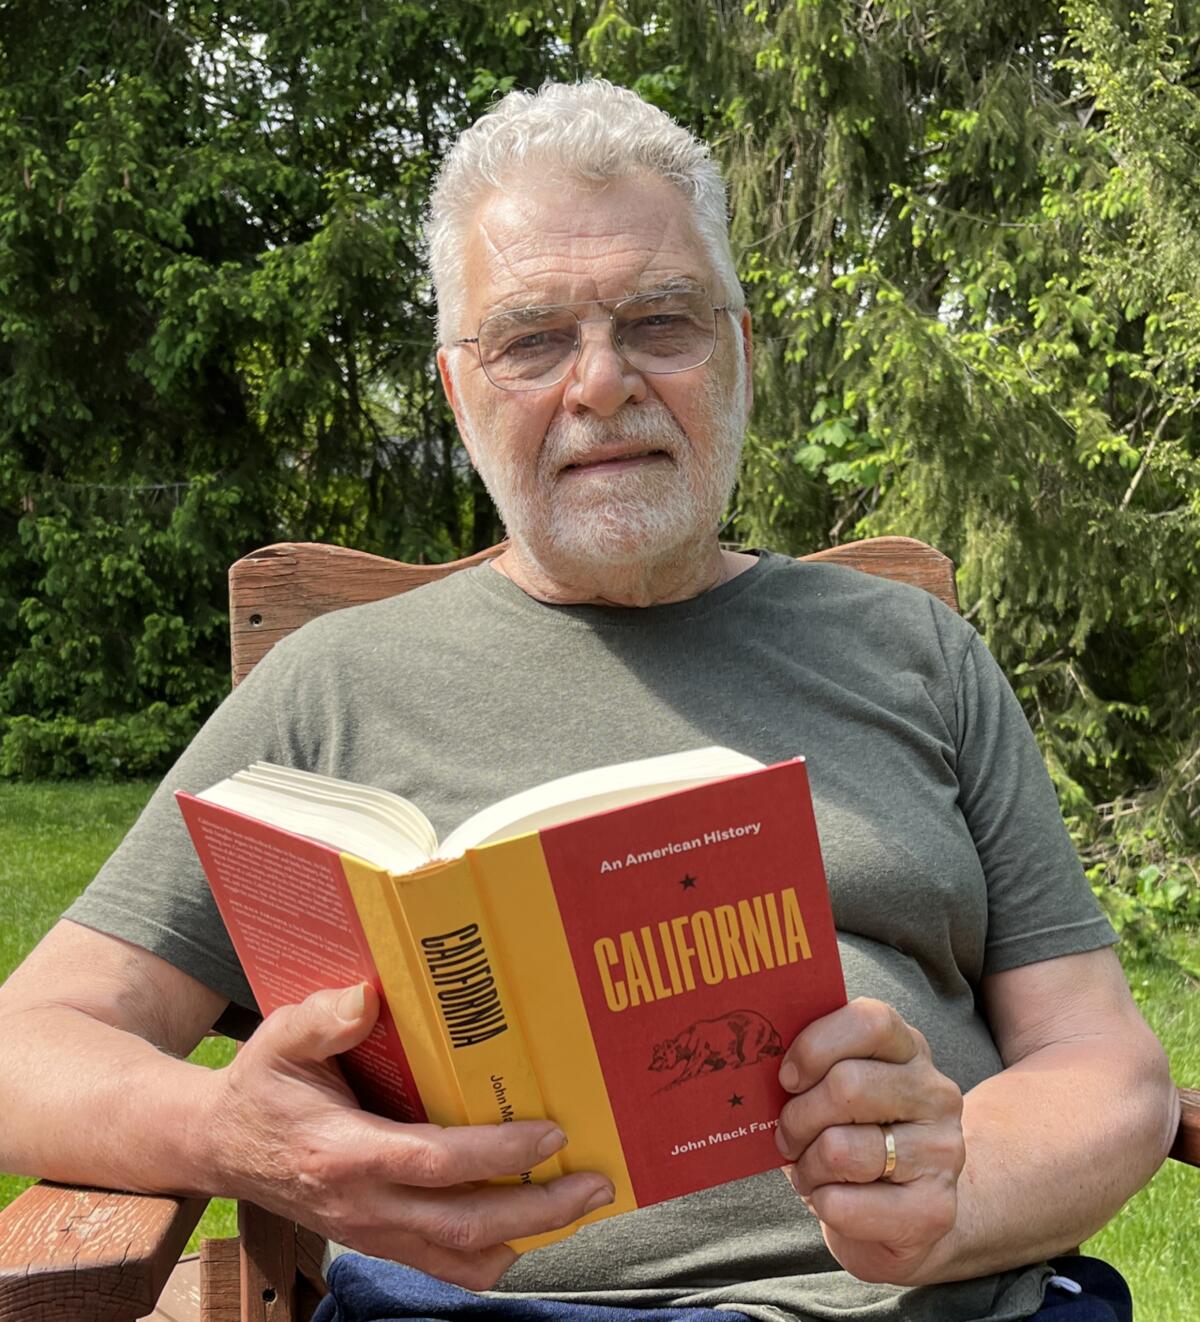 A man in a T-shirt sits outside holding a book open